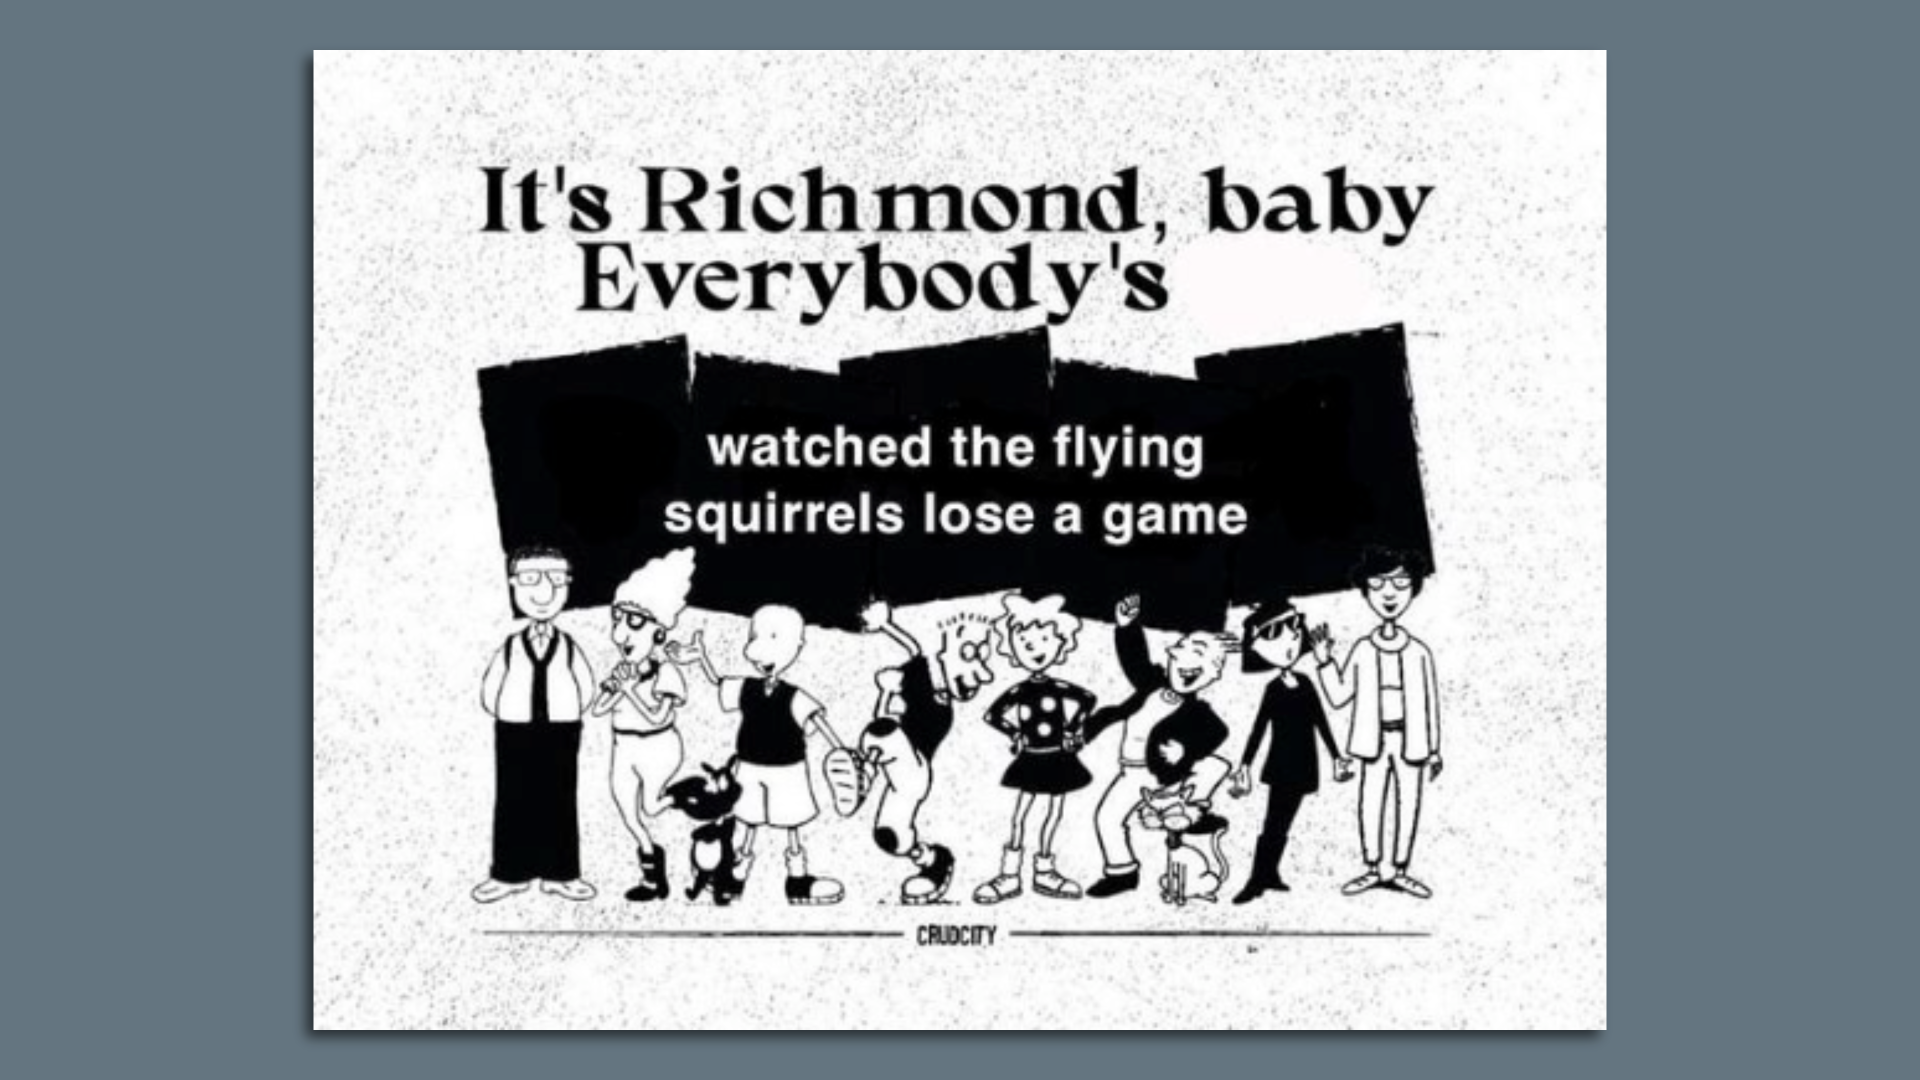 Meme with 10 characters from show doug, above them is a sign that says, "it's Richmond, Baby, Everybody's watched the flying squirrels lose a game